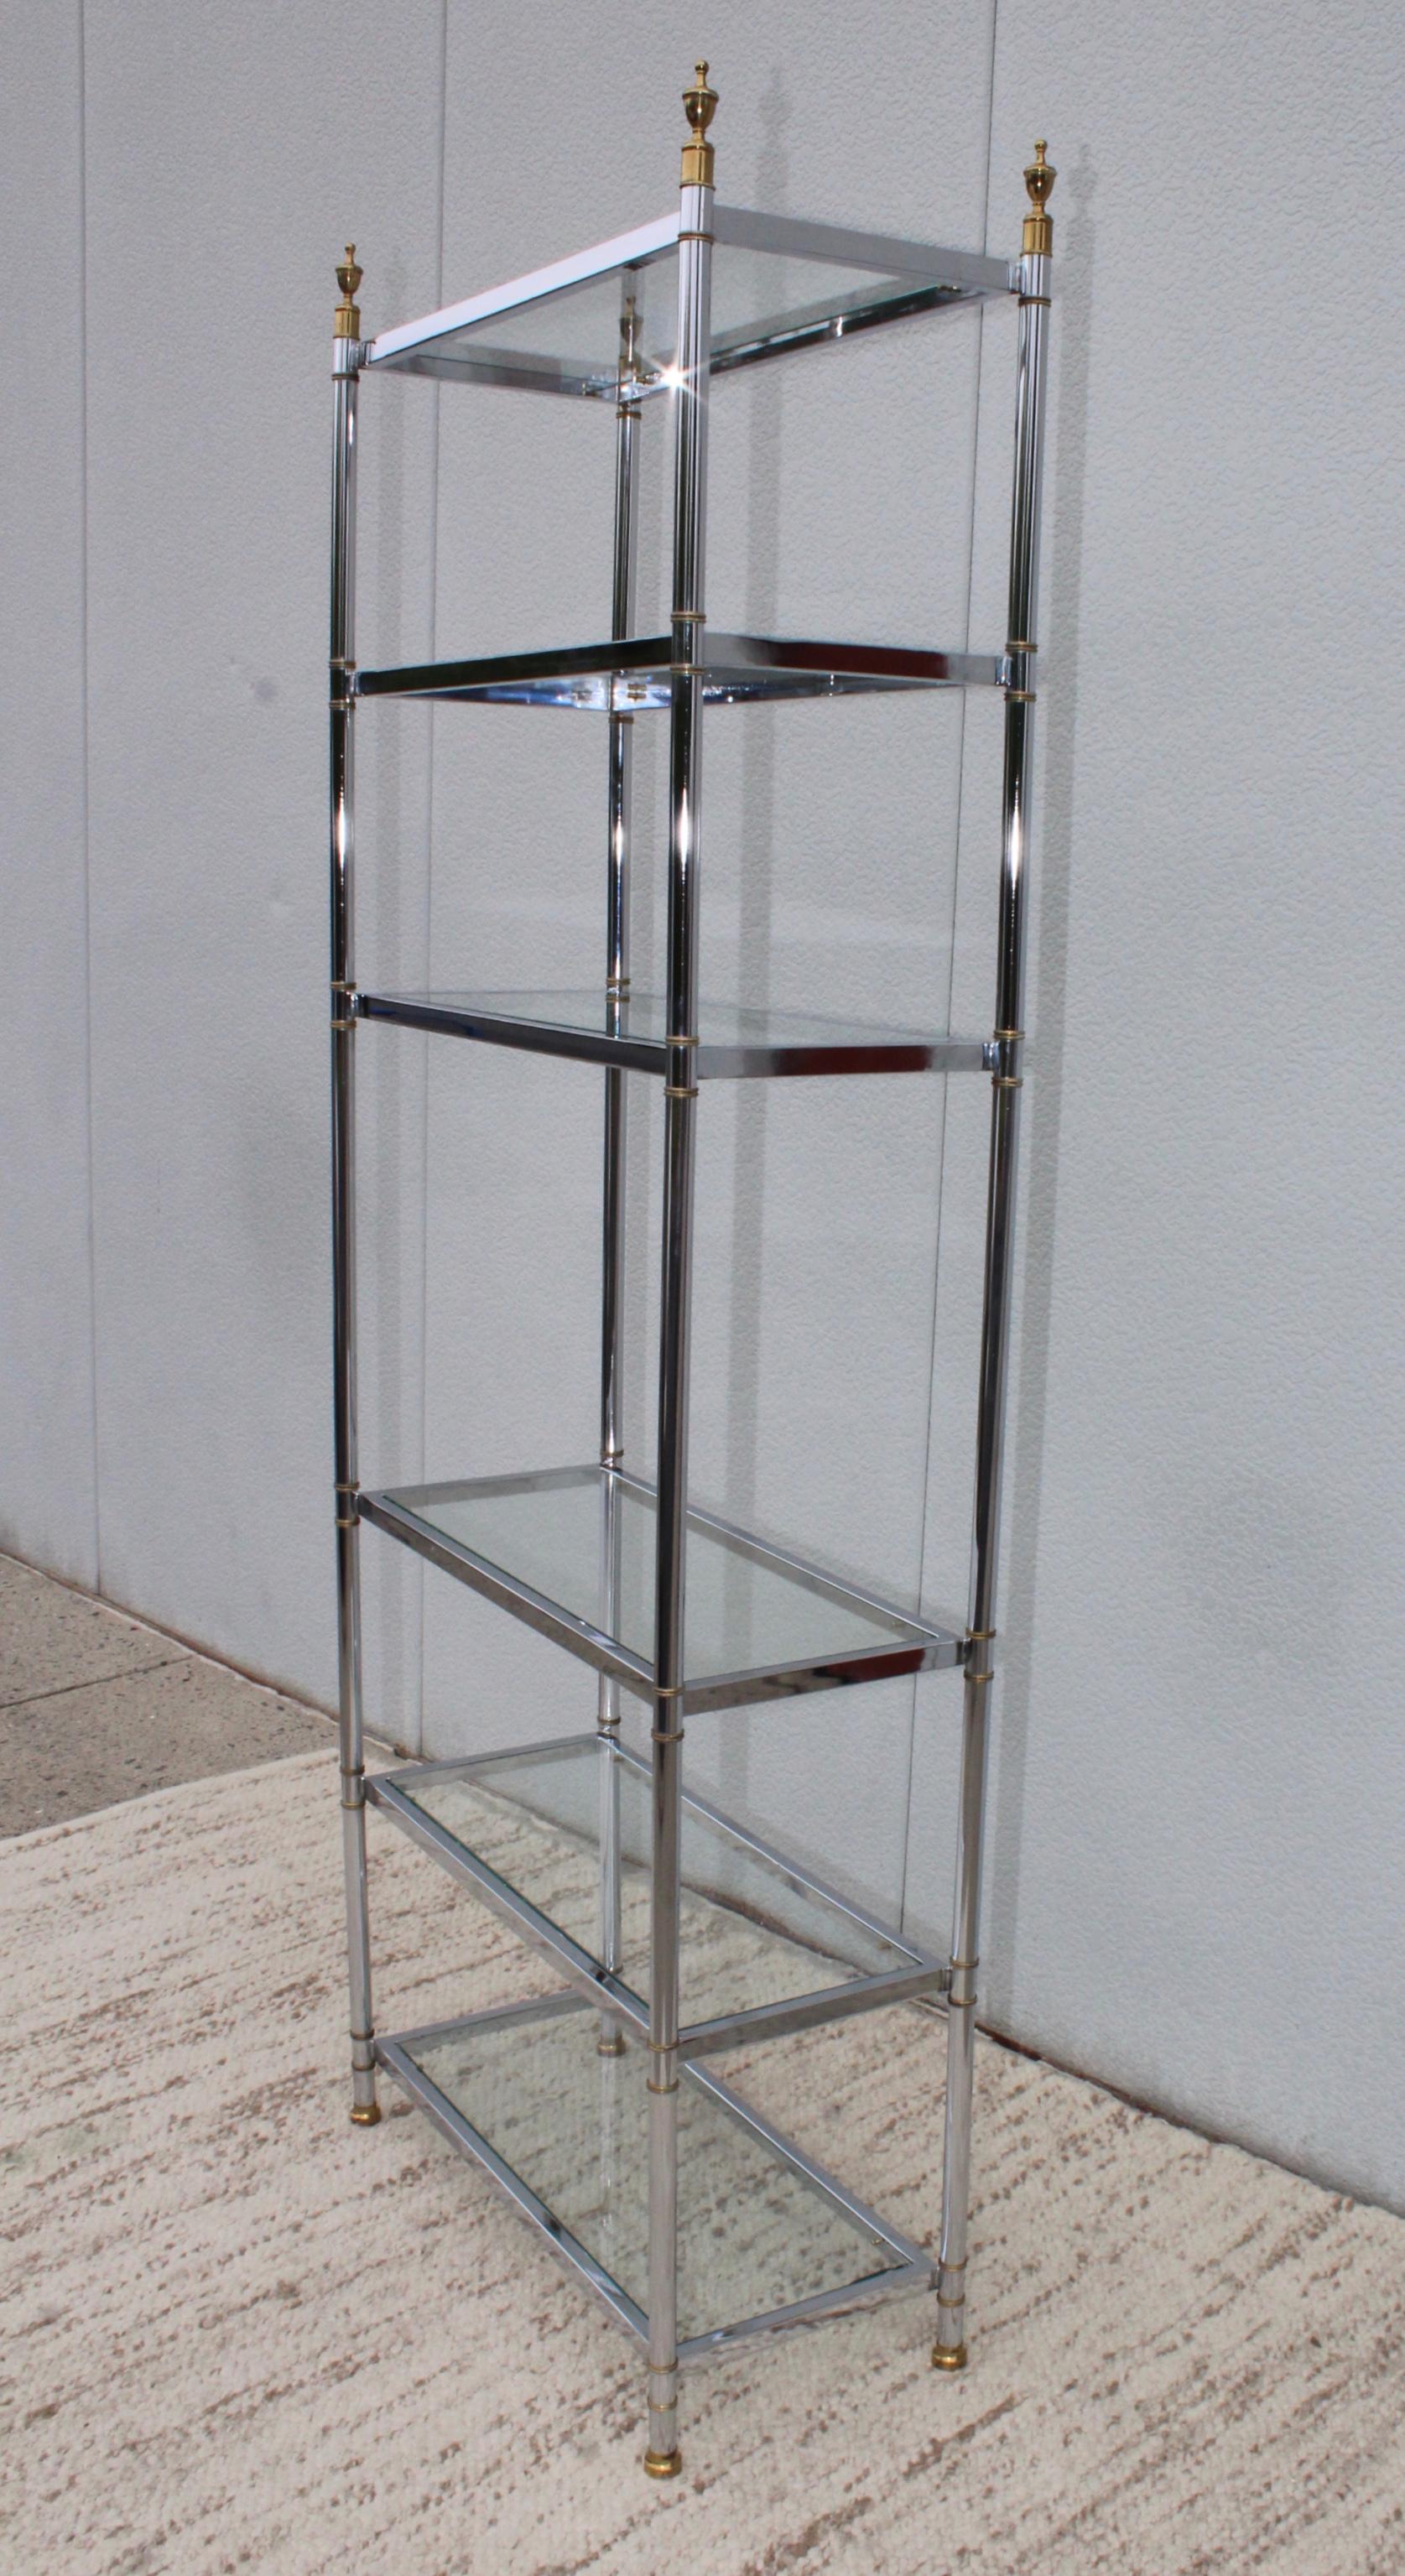 1970s Mid-Century Modern chrome and brass Etagere in the style of Maison Jansen.